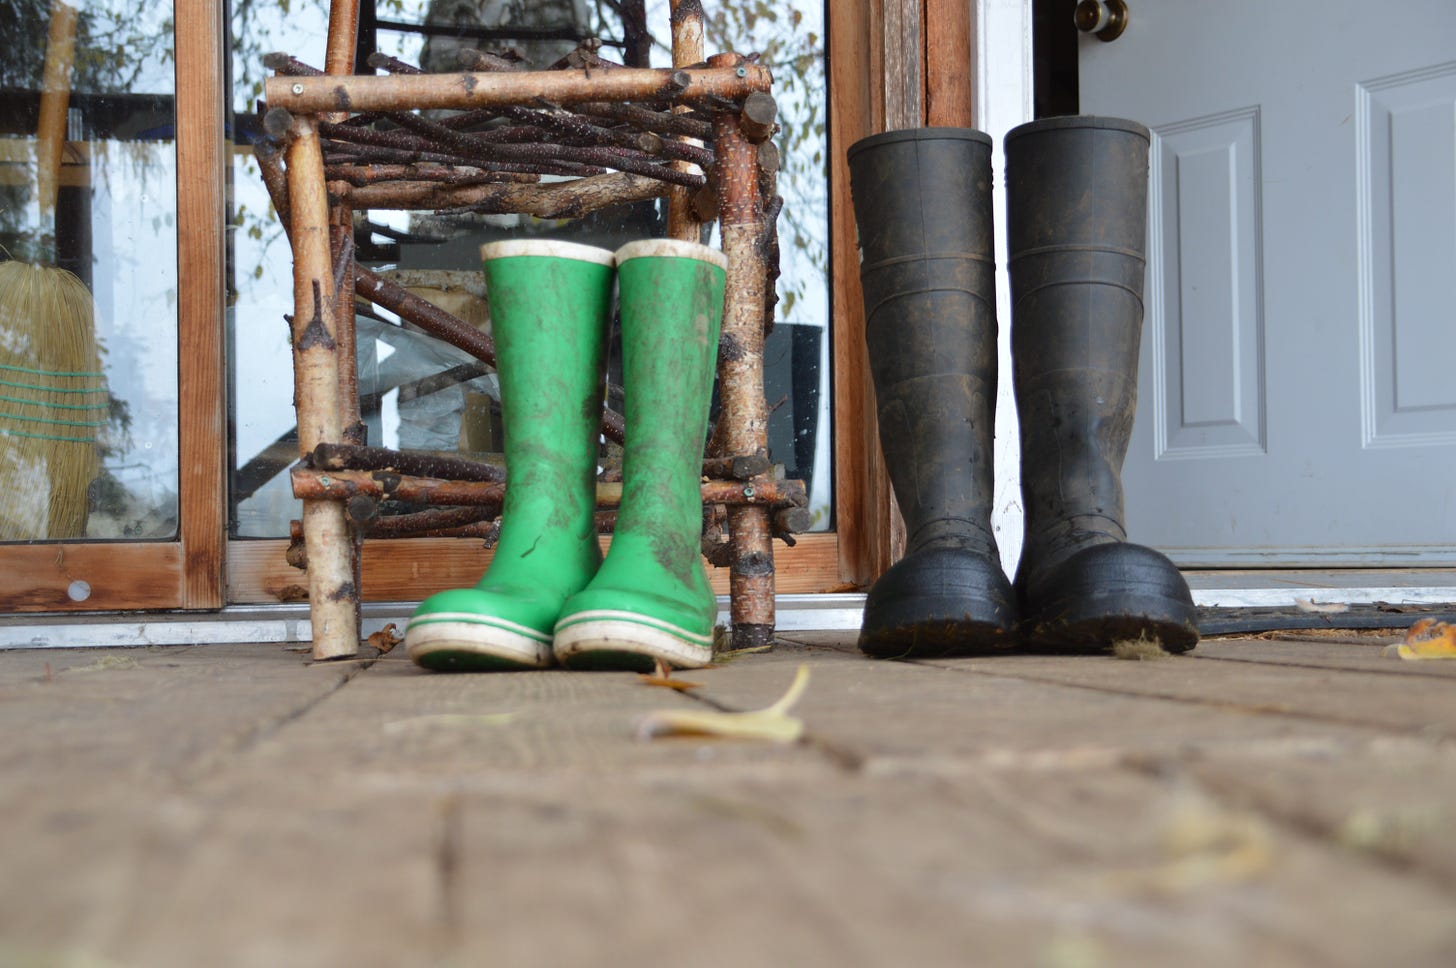 Two pairs of rubber boots - green and black - stand in front of a wooden chair, outside a doorway entrance